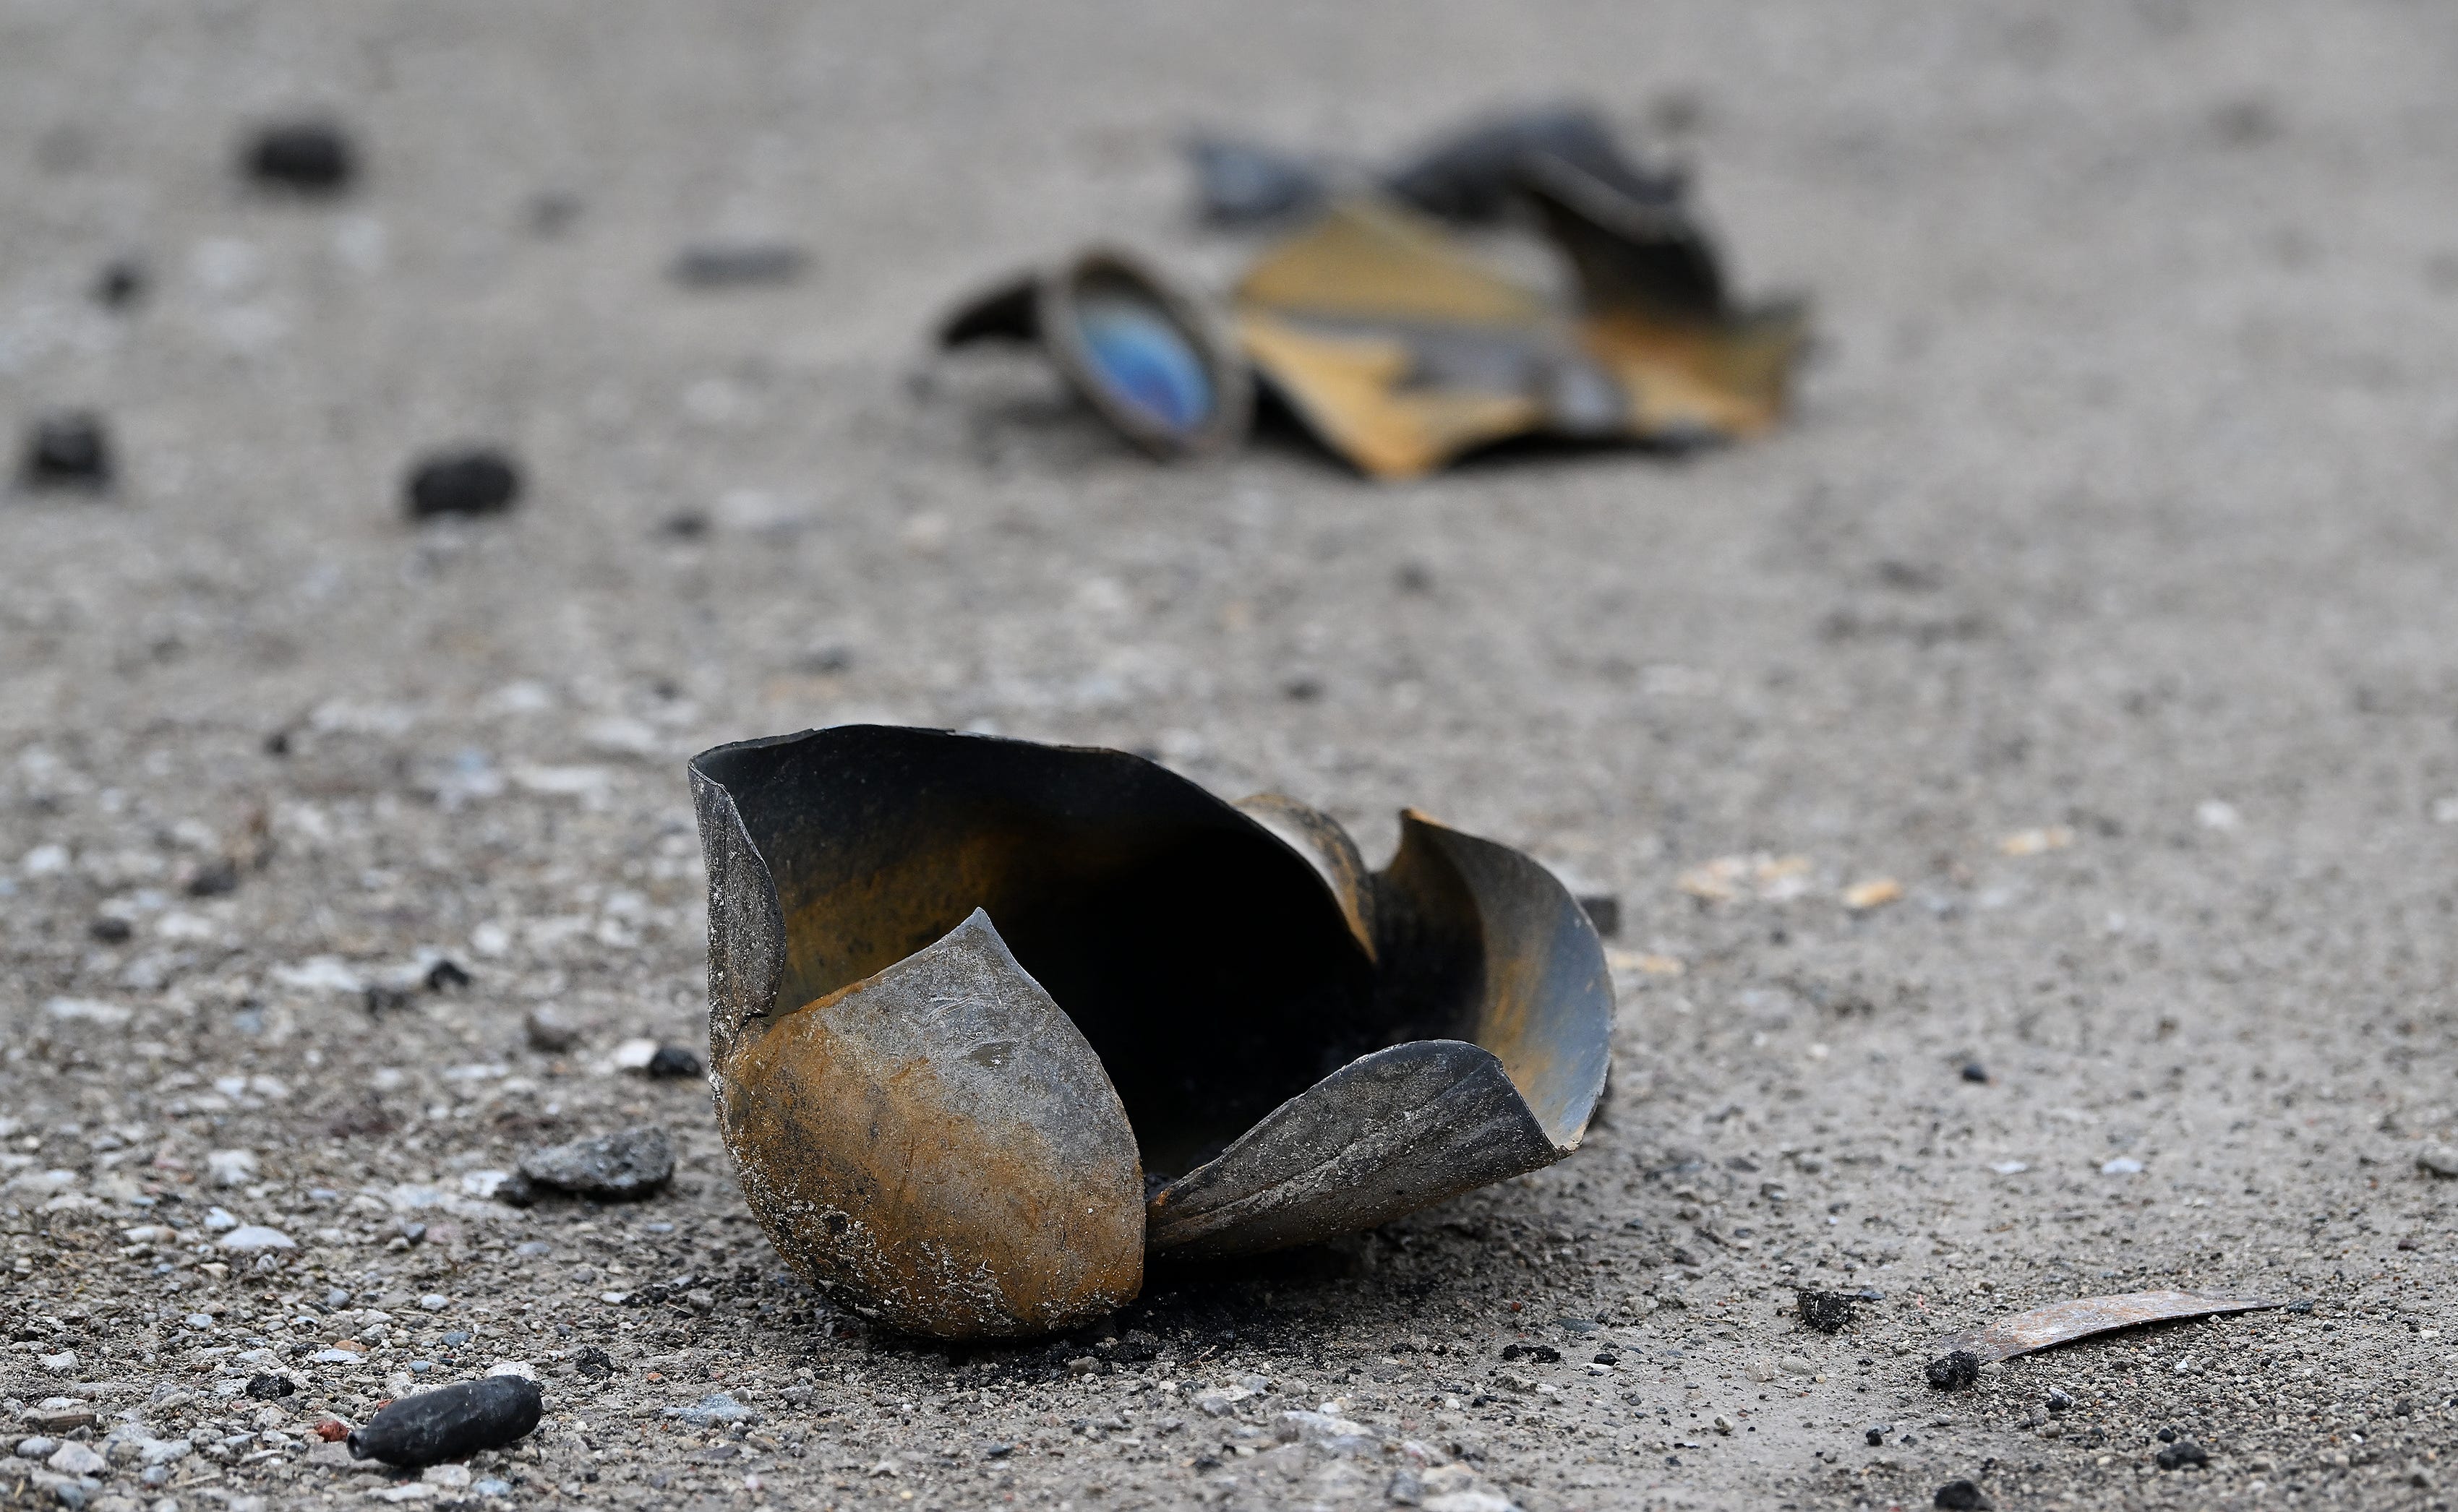 Exploded canisters are strewn around the area near Select Distributors and Goo LLC in Clinton Township, Mich. on Mar. 5, 2024. Select Distributors was the scene of fire and explosions the night before on March 4, 2024.